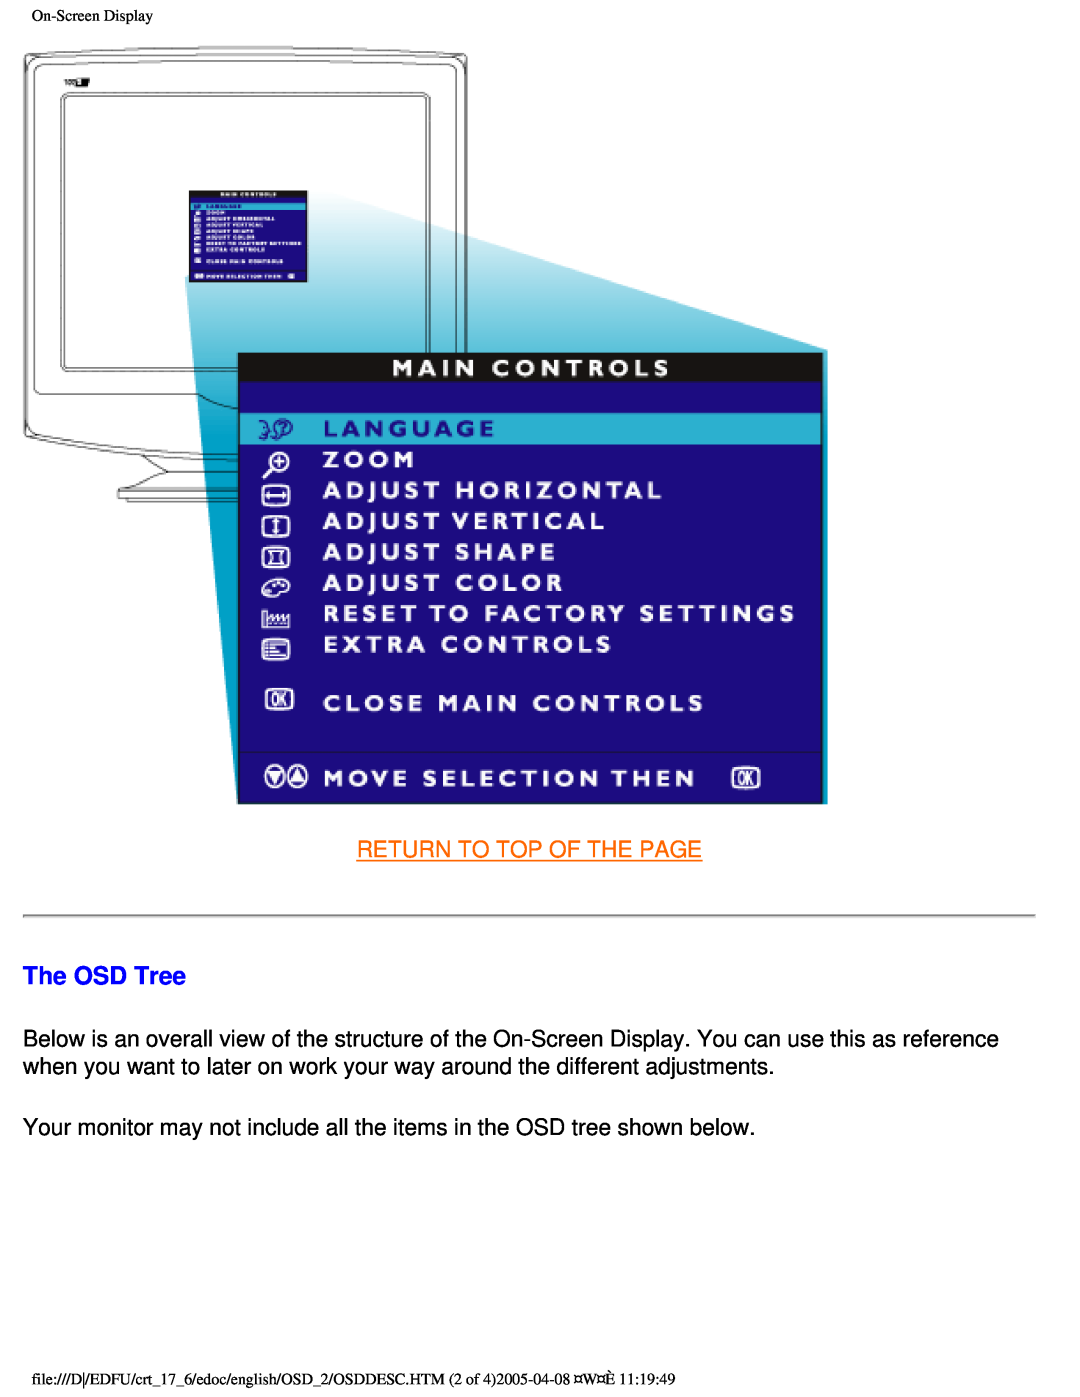 Philips 107C65 user manual The OSD Tree, Return To Top Of The Page, On-ScreenDisplay 